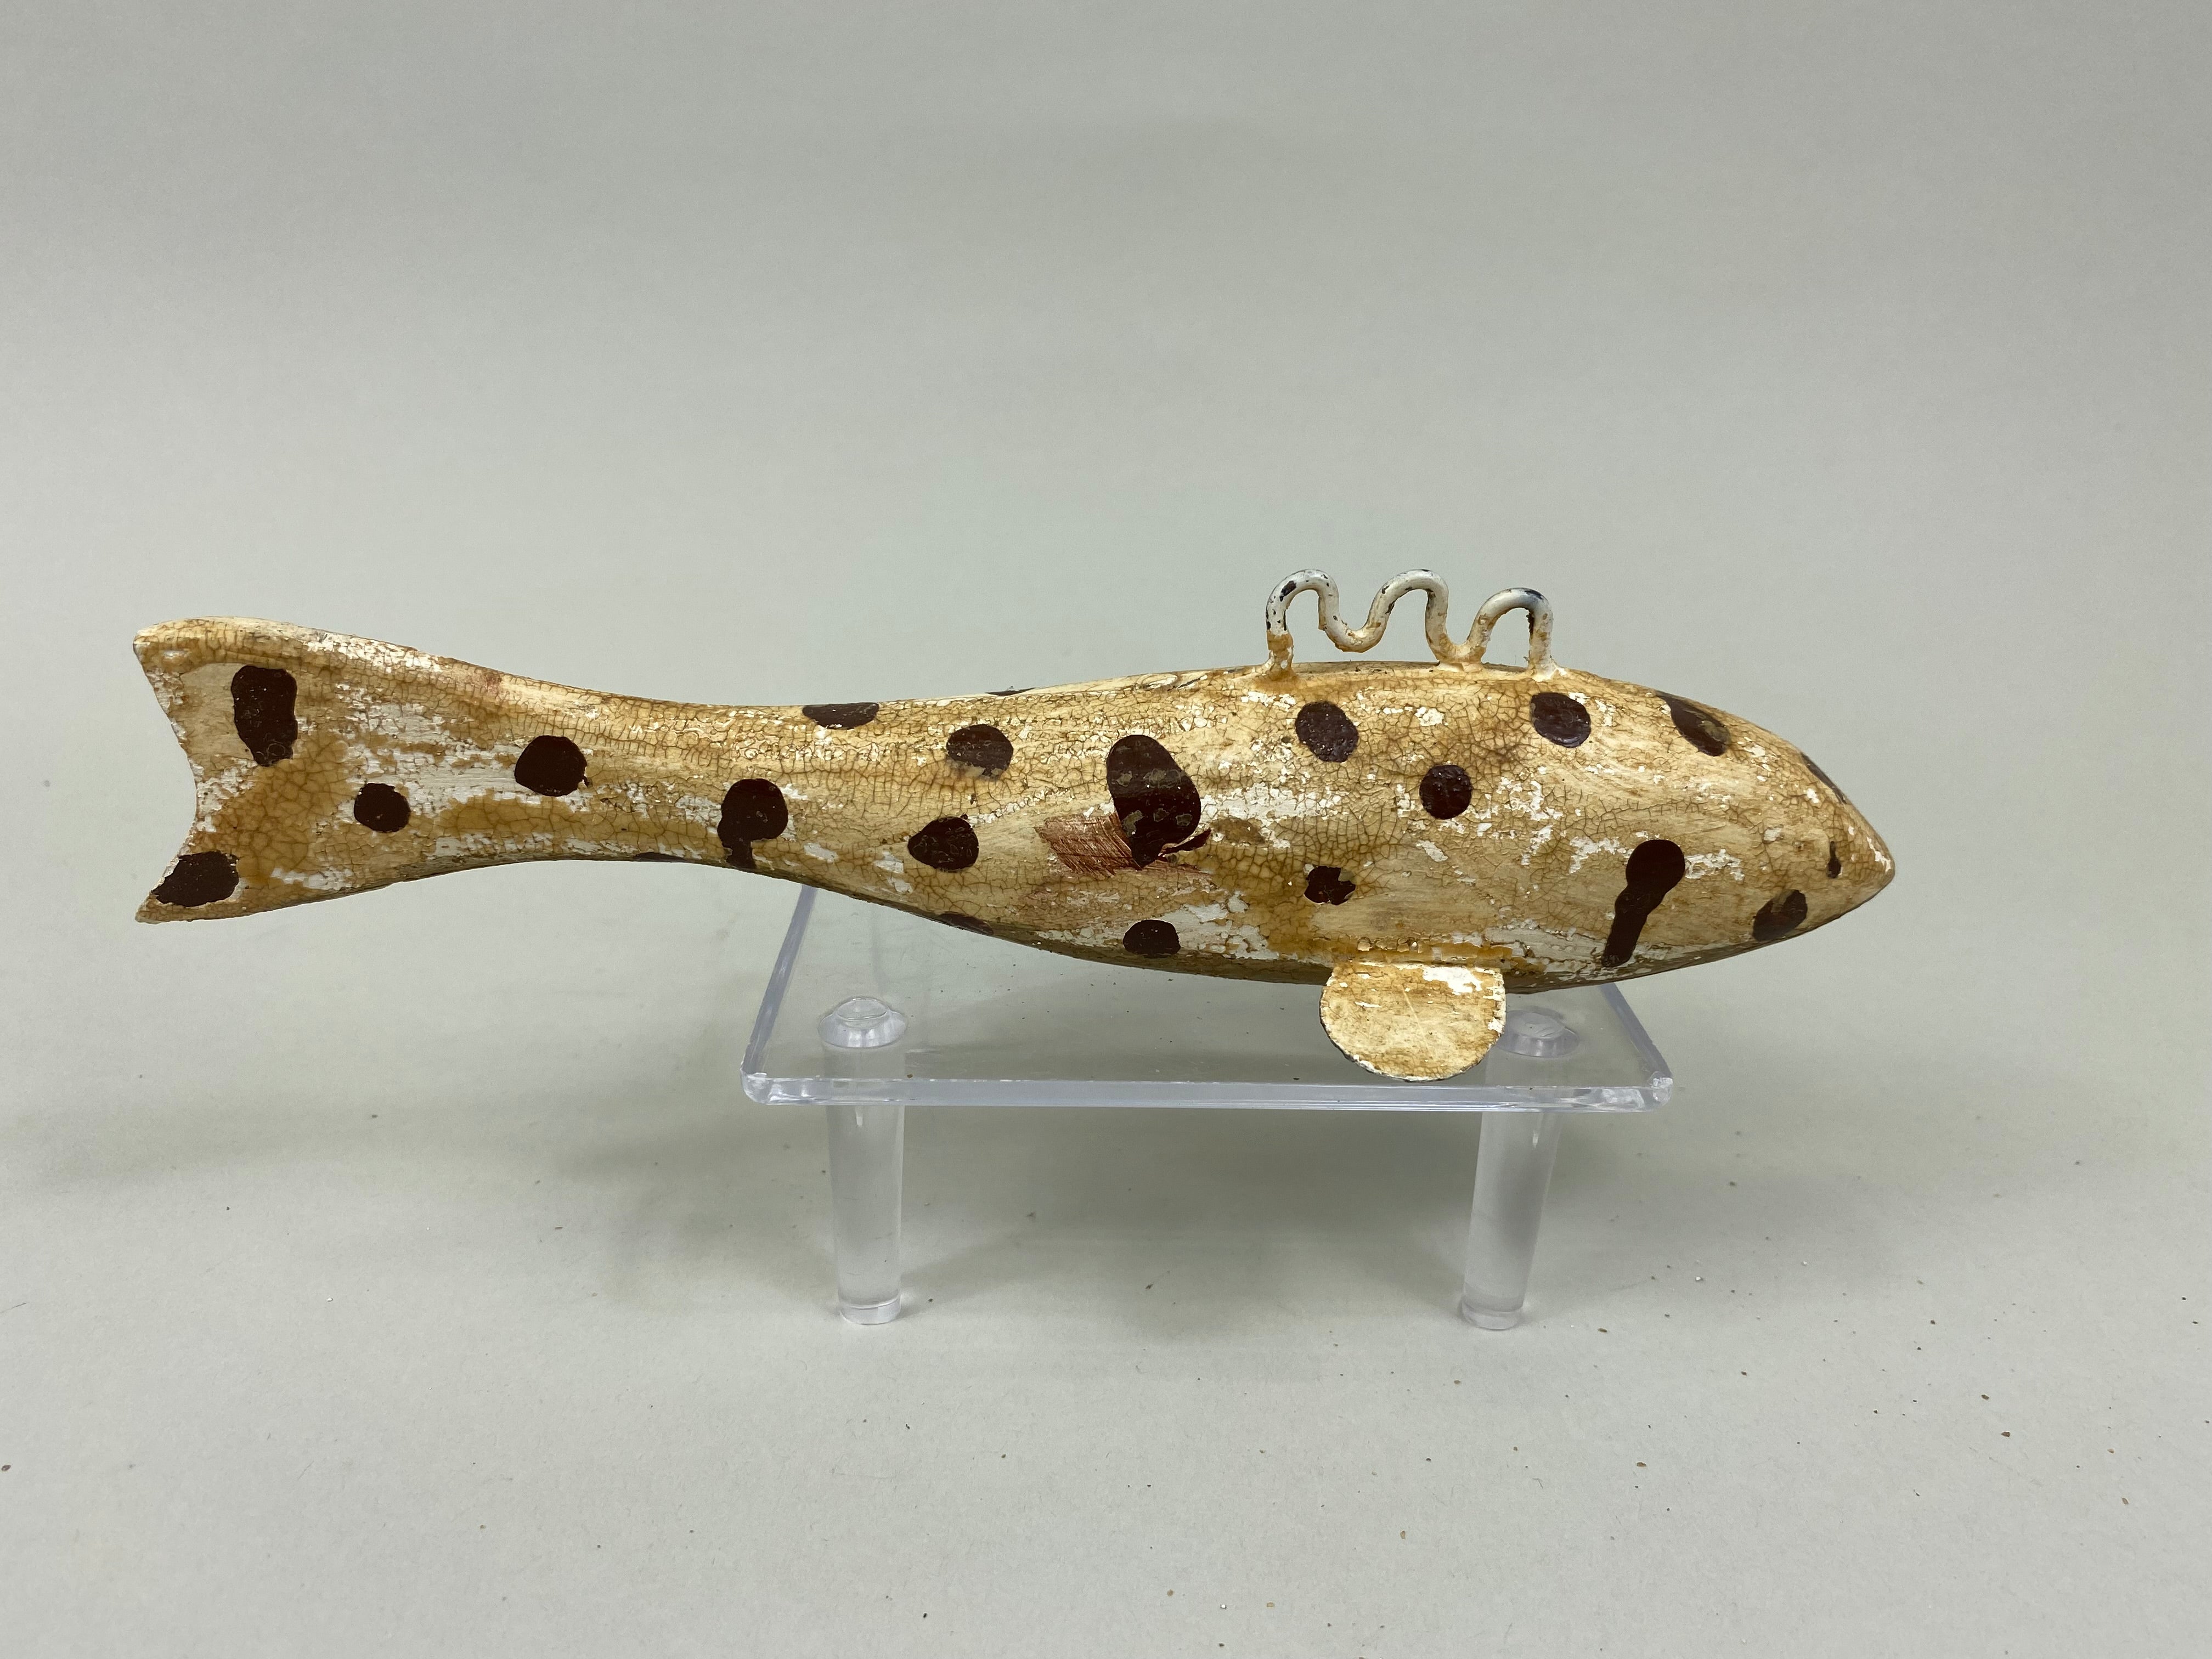 Antique Fishing Lures: A Collection of Homemade and Decoy Carved Baits